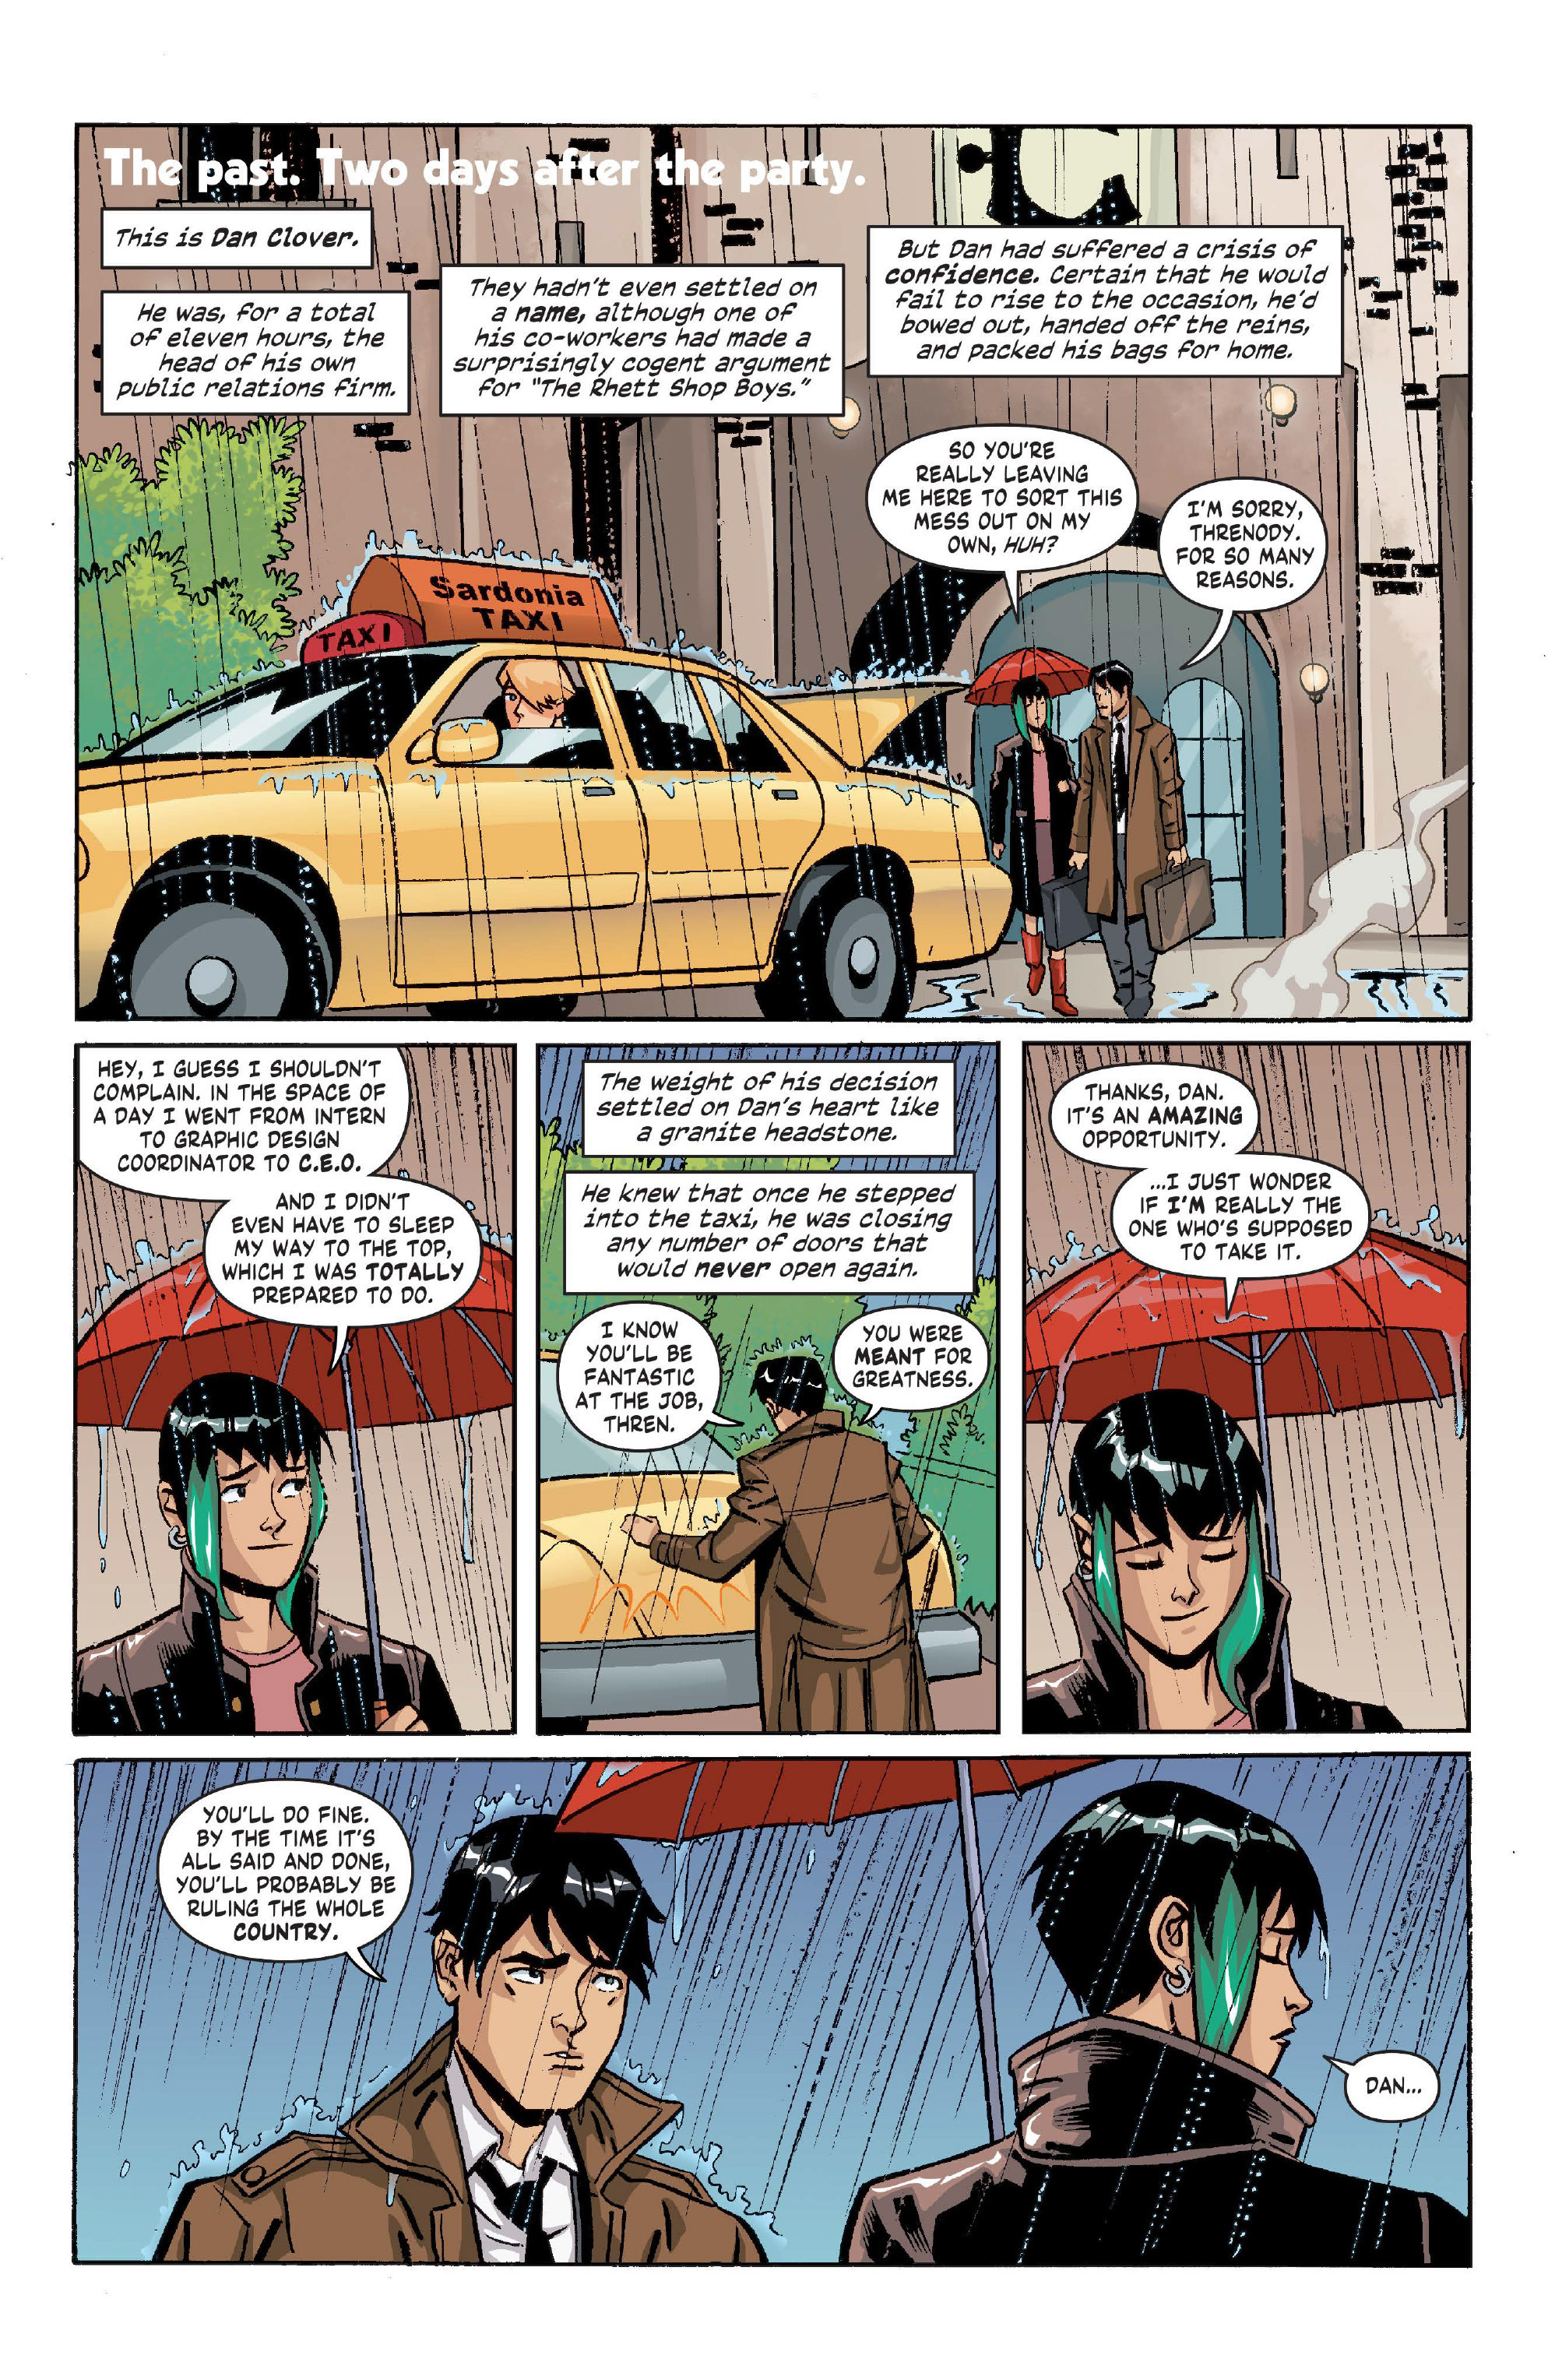 Public Relations (2015-): Chapter 5 - Page 2